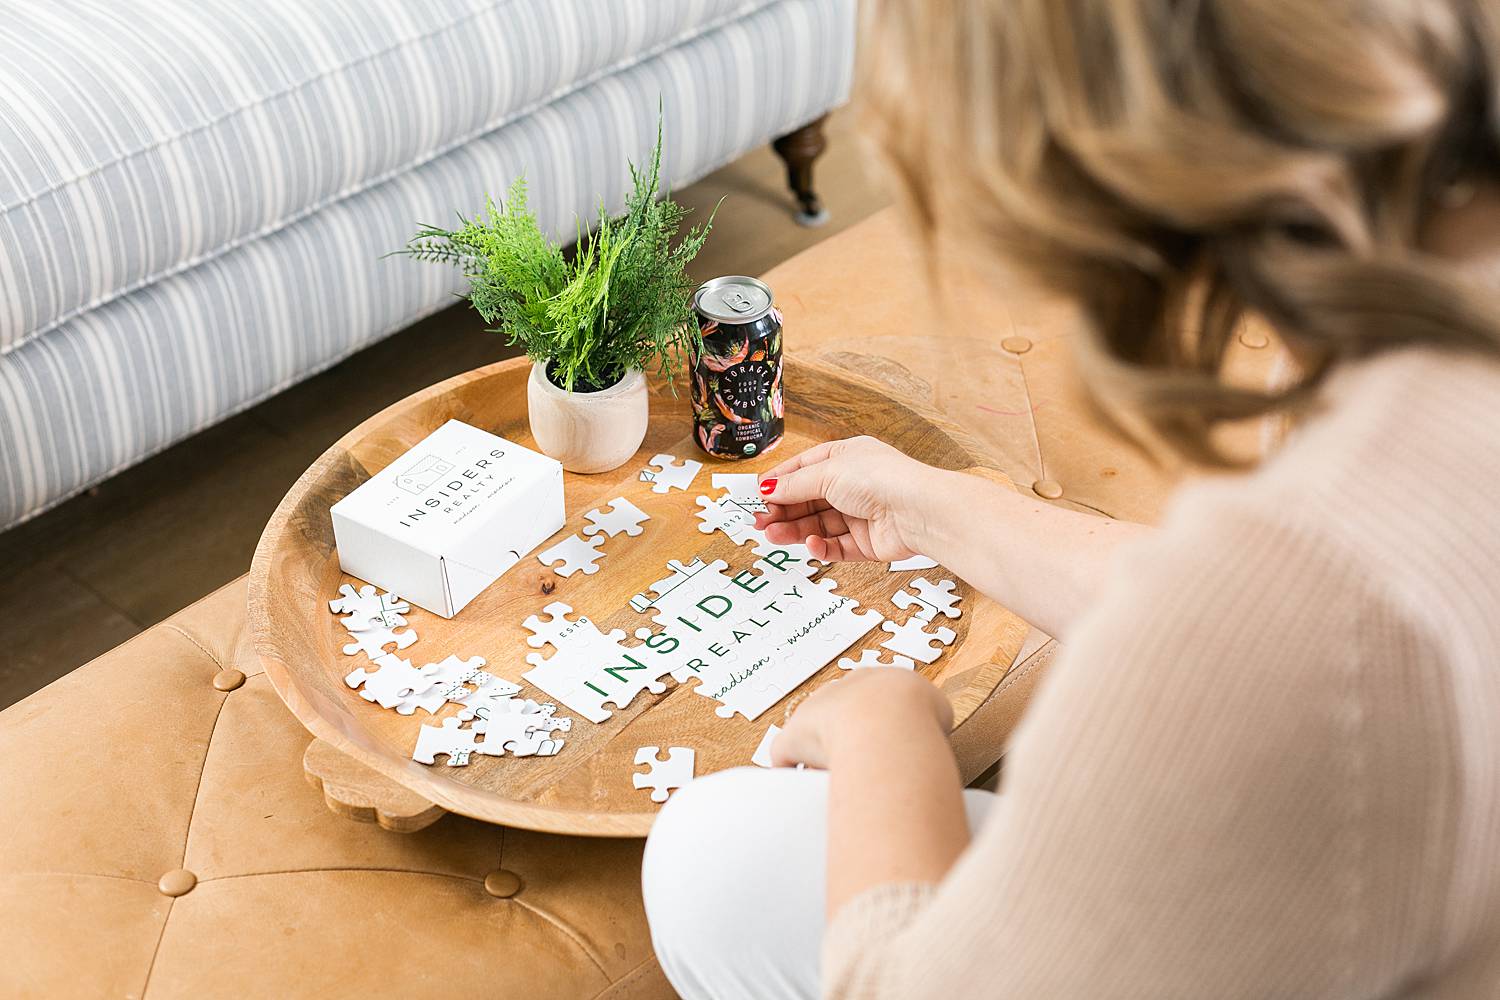 woman putting together custom branded insiders realty puzzle at coffee table in living room